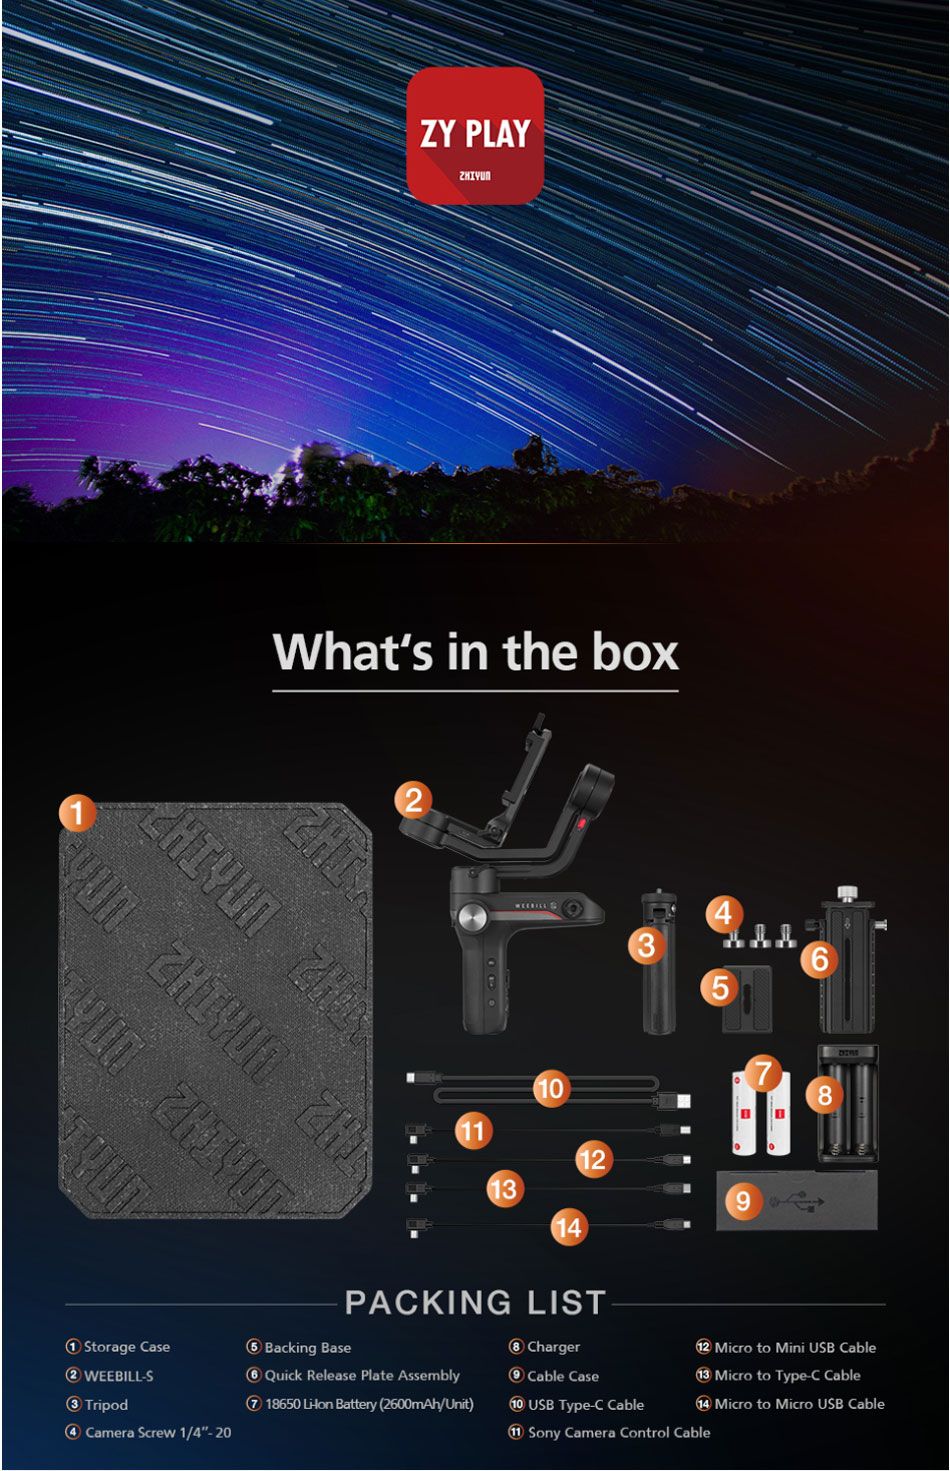 Zhiyun-Weebill-S-Image-Transmission-Pro-3-Axis-Handheld-Gimbal-Stabilizer-with-CMF-04-Follow-Focus-I-1612936